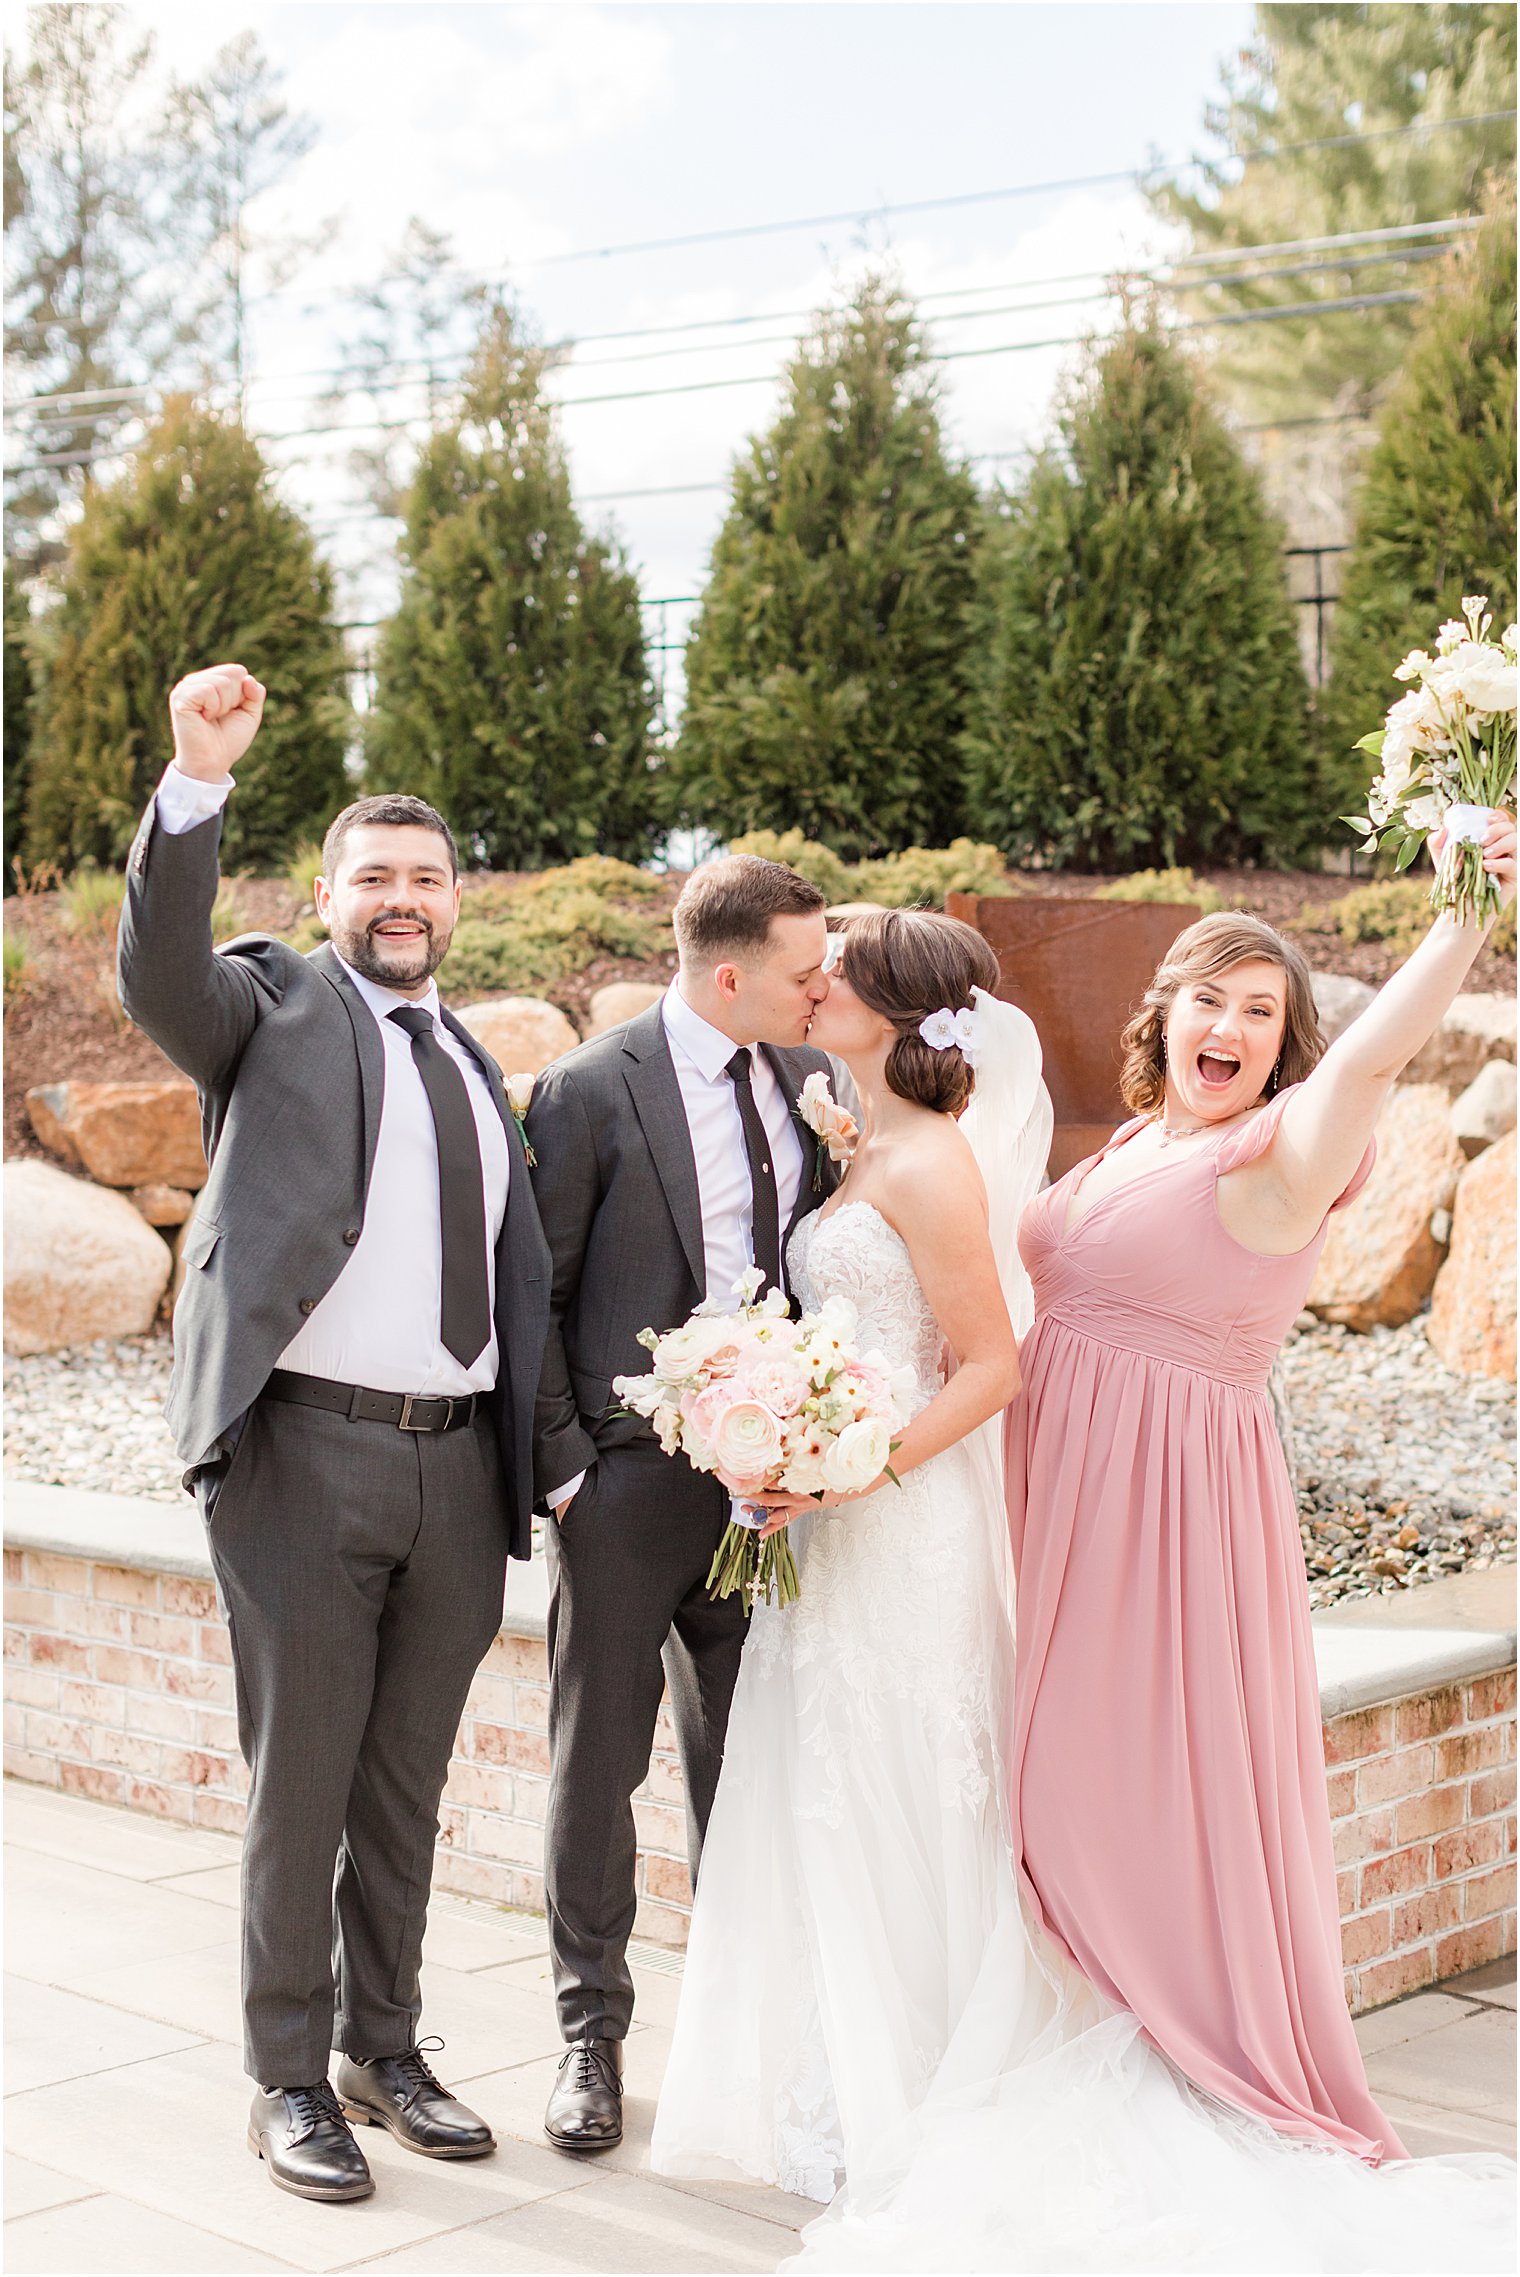 best man and maid of honor cheer while bride and groom kiss